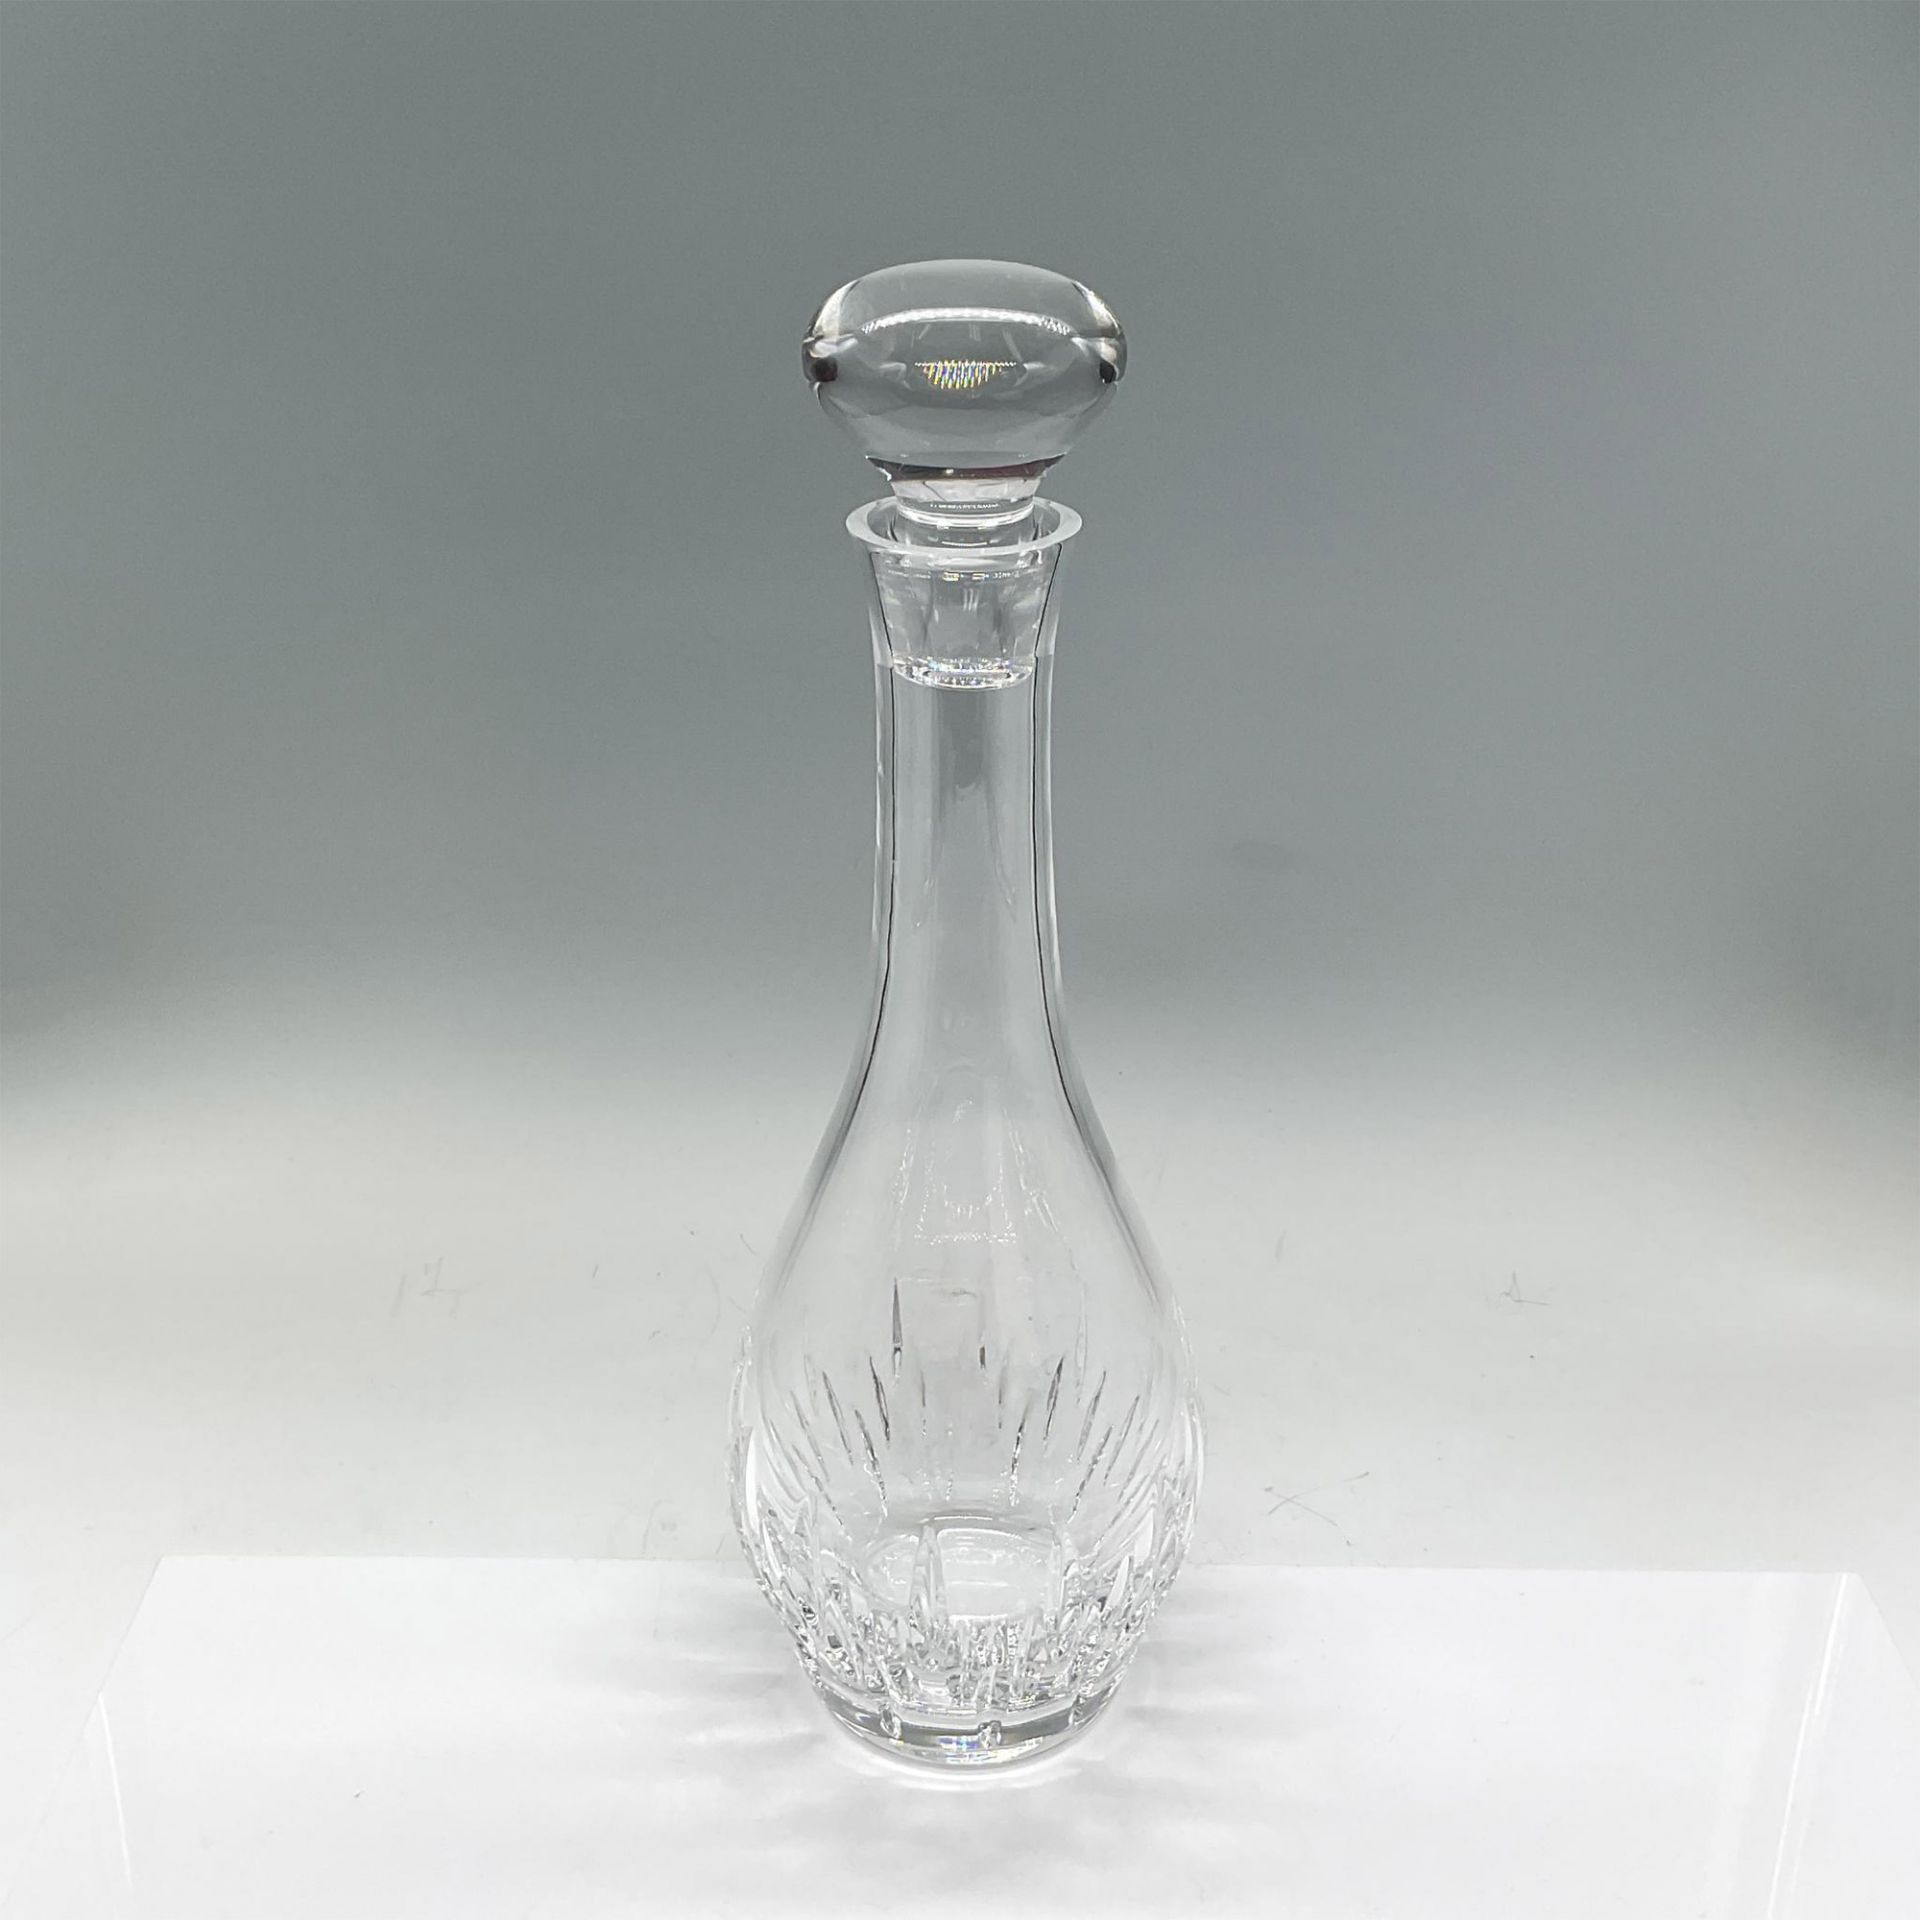 Vera Wang for Wedgwood Crystal Decanter with Stopper - Image 2 of 4